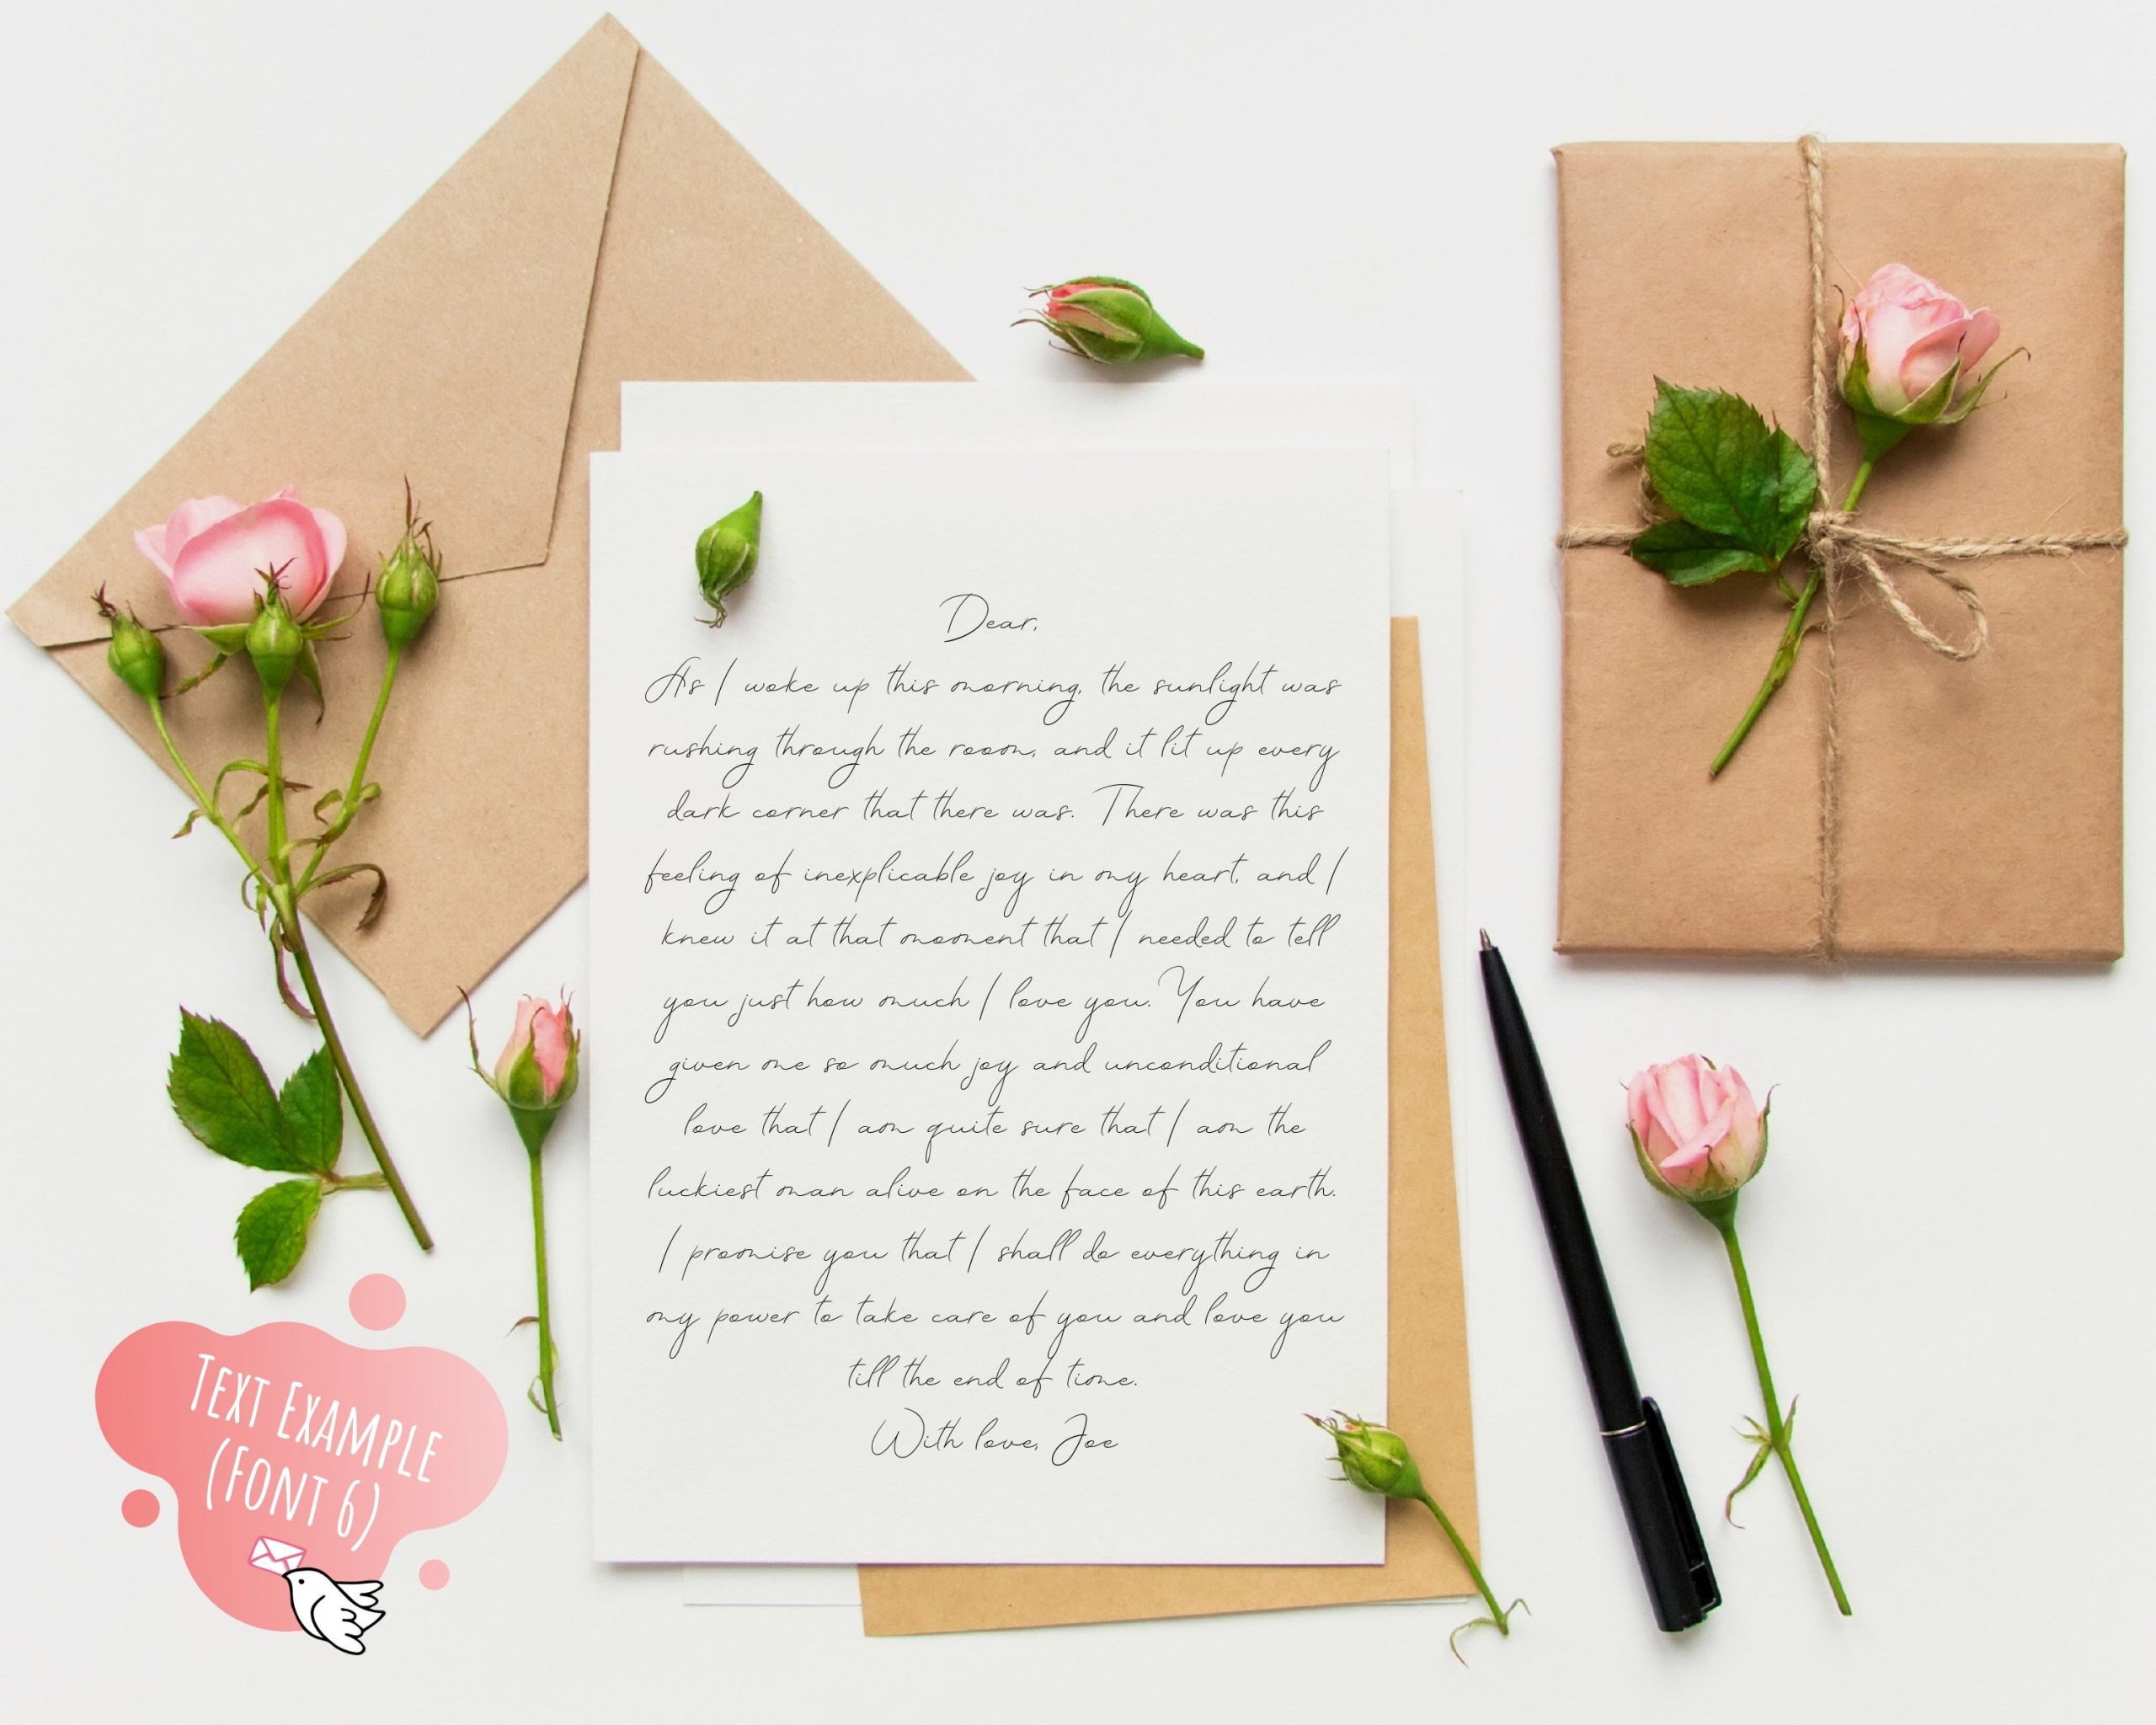 An everlasting love letter, customized with an exclusive love mark